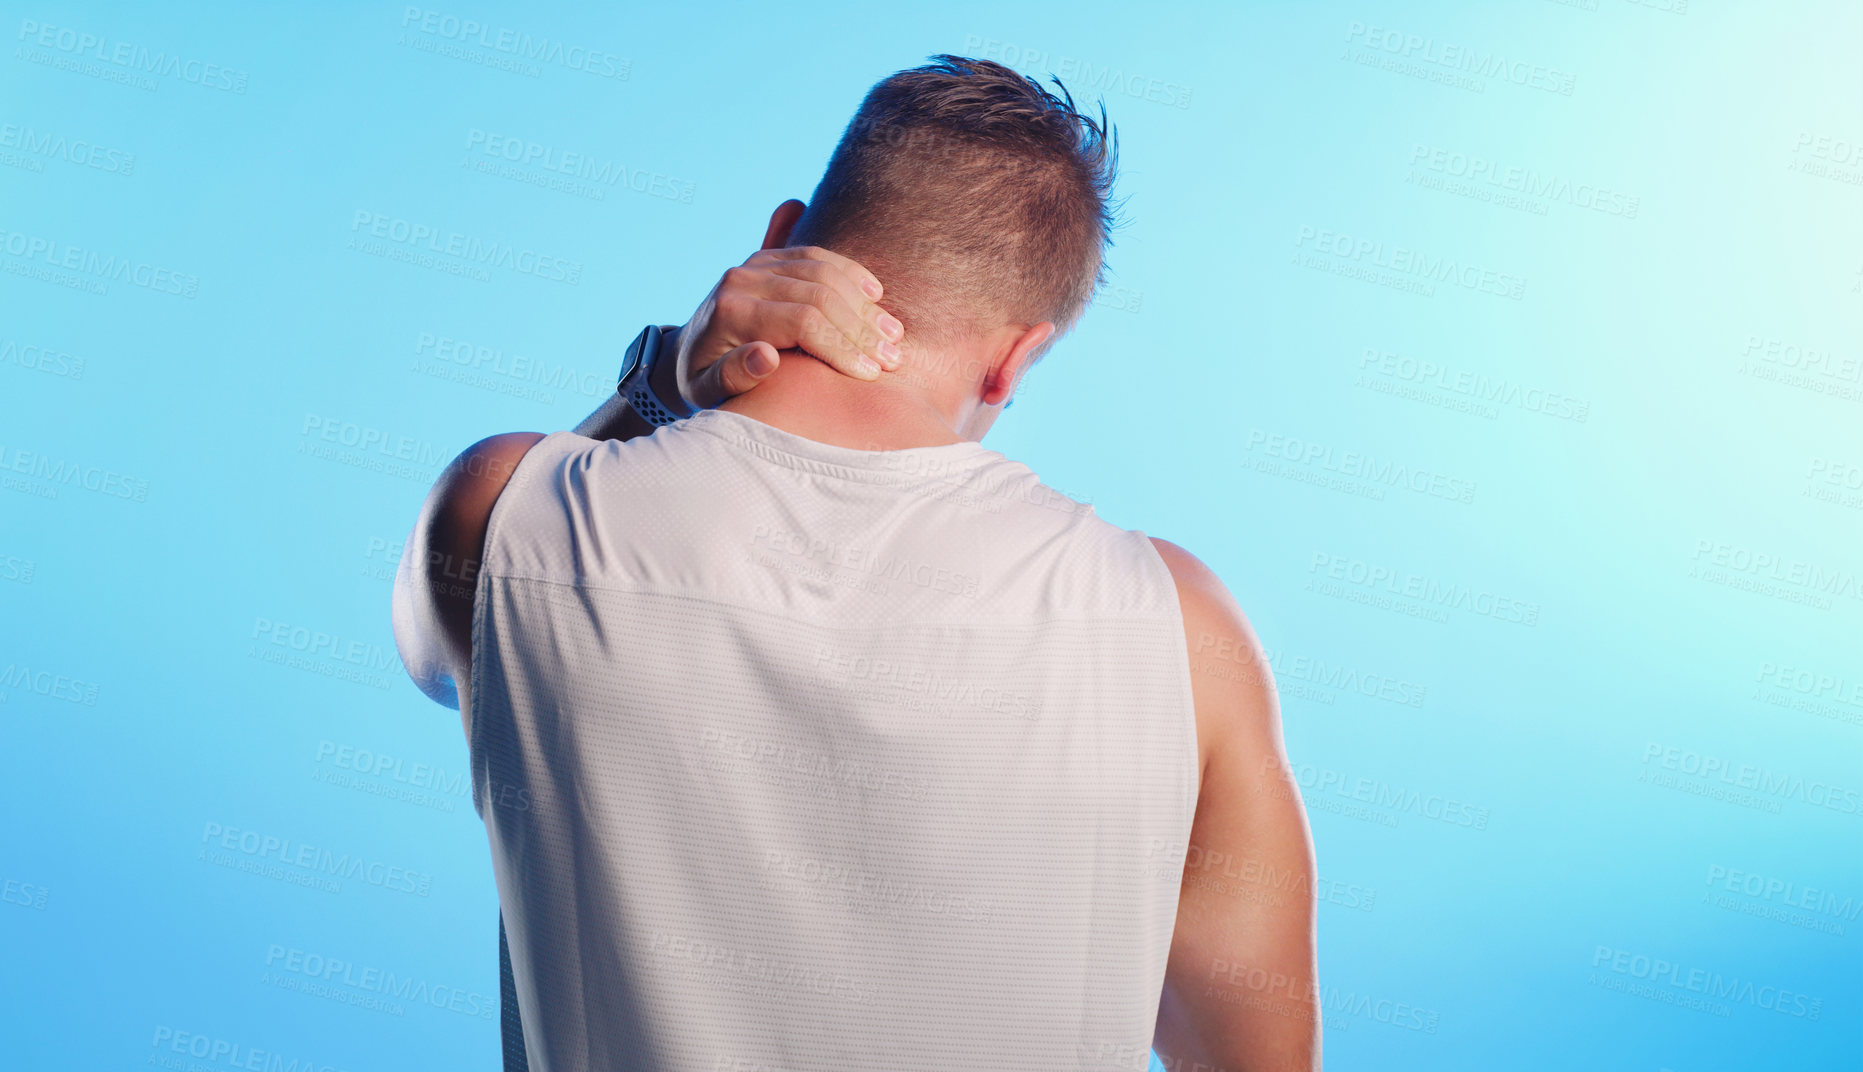 Buy stock photo Rearview shot of an unrecognizable young man rubbing his neck in pain against a blue background